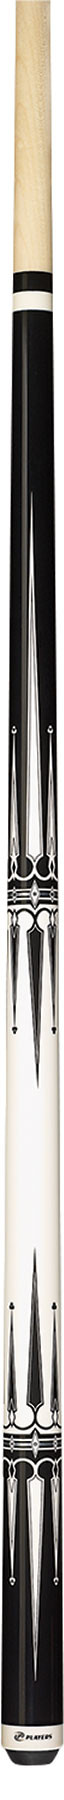 Players G-2285 Black and White Pool Cue Stick